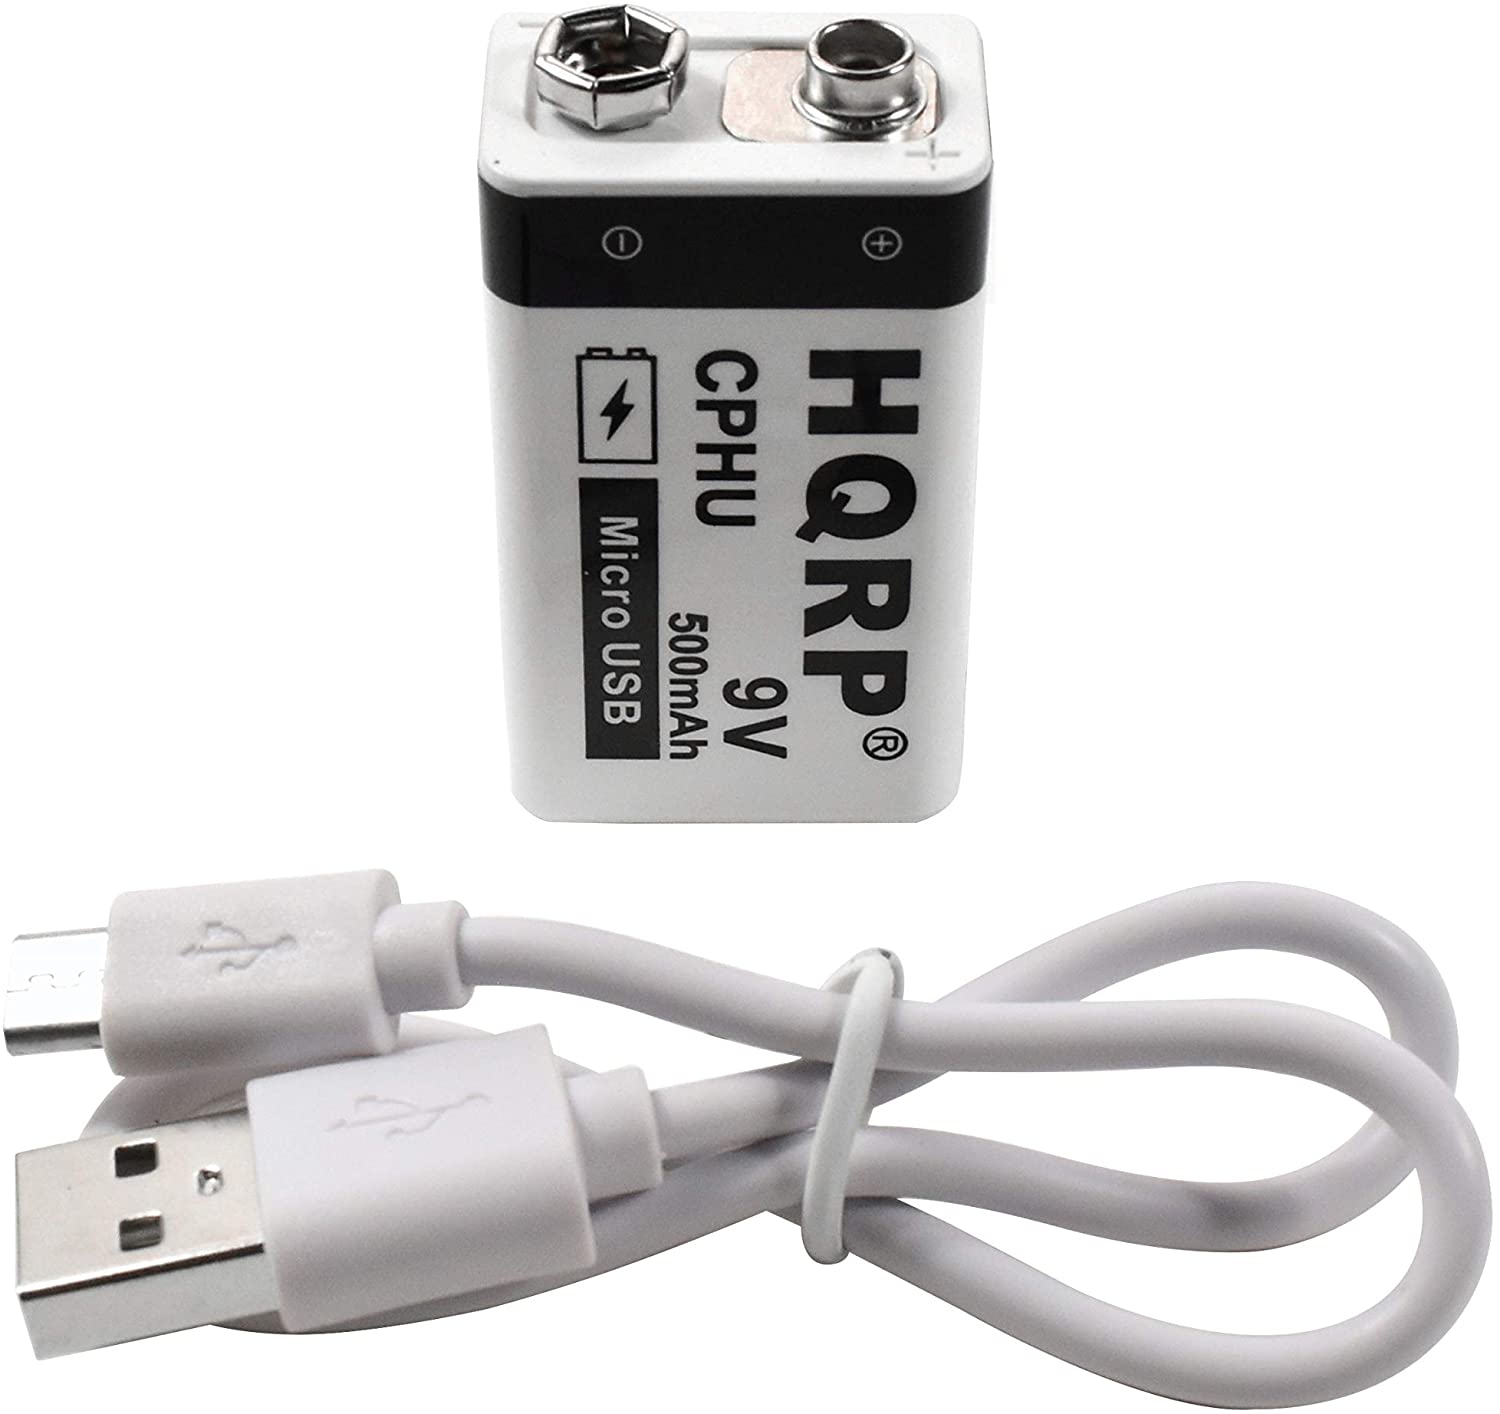 HQRP USB 9V Lithium-Ion Rechargeable Battery, High Capacity 500mAh 9-Volt, 1.5 H Fast Charge, 800 Cycle with Micro USB Cable, Radio Square 6LR61 7.2H5 6KR61 6HR61 PP3 MN1604 - image 1 of 8